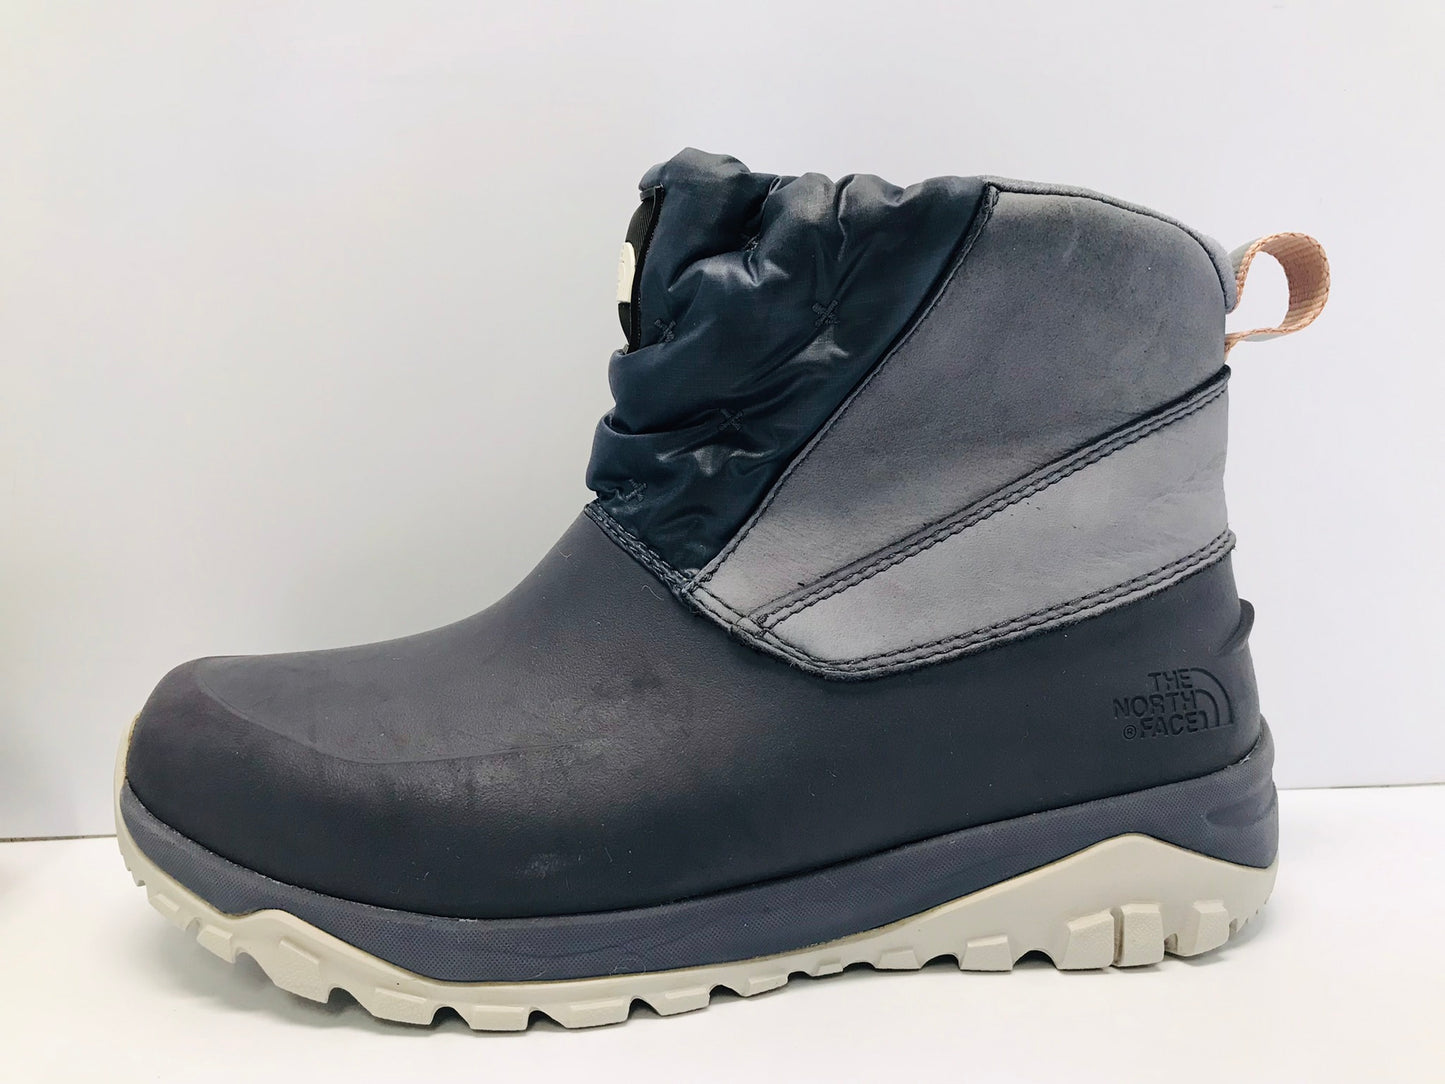 Winter Boots Ladies Size 7.5 The North Face Prima Loft Leather Top Blue Ankle Boot Like New